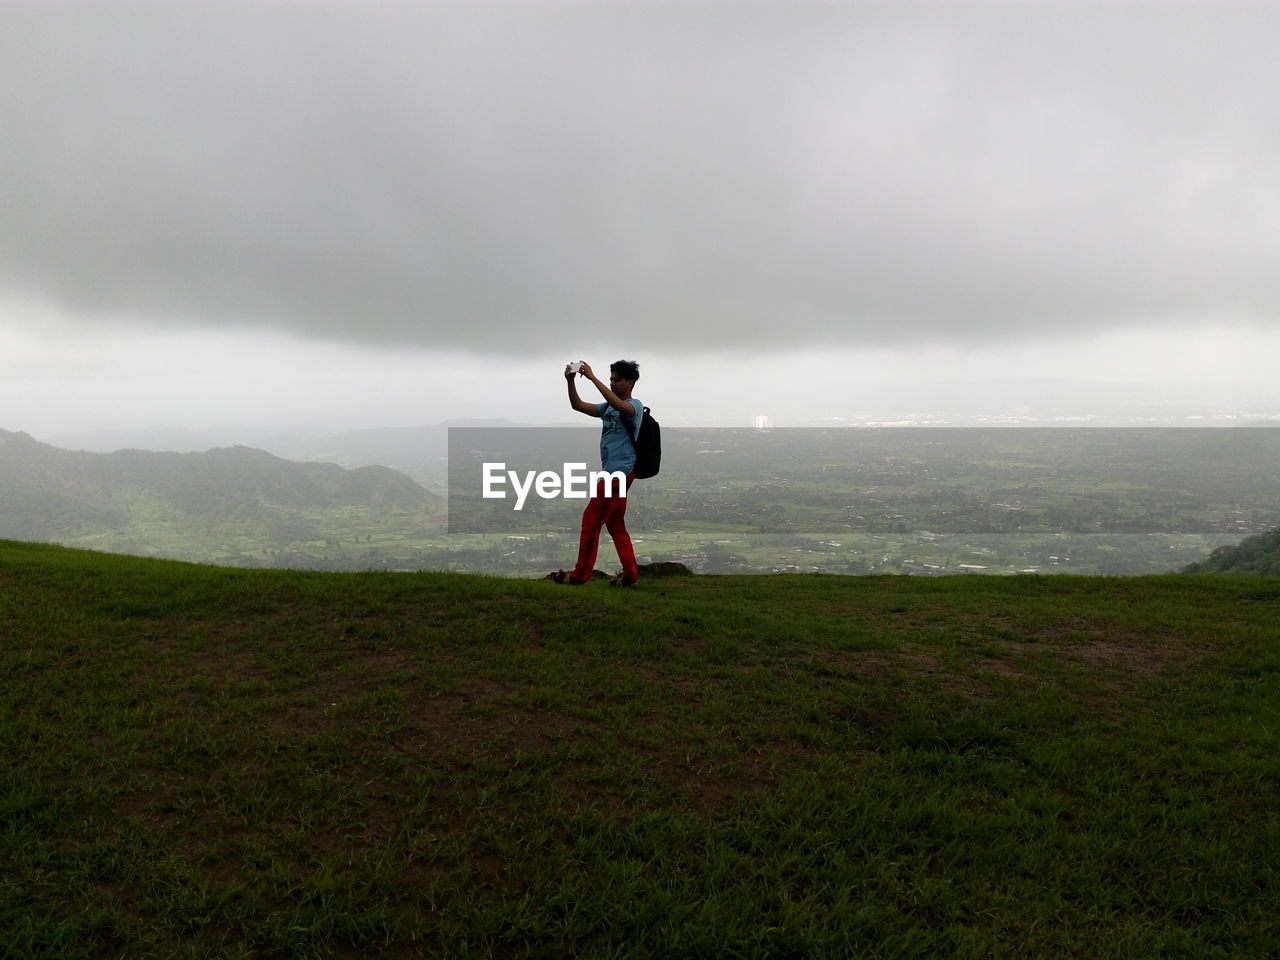 Man standing on mountain against cloudy sky